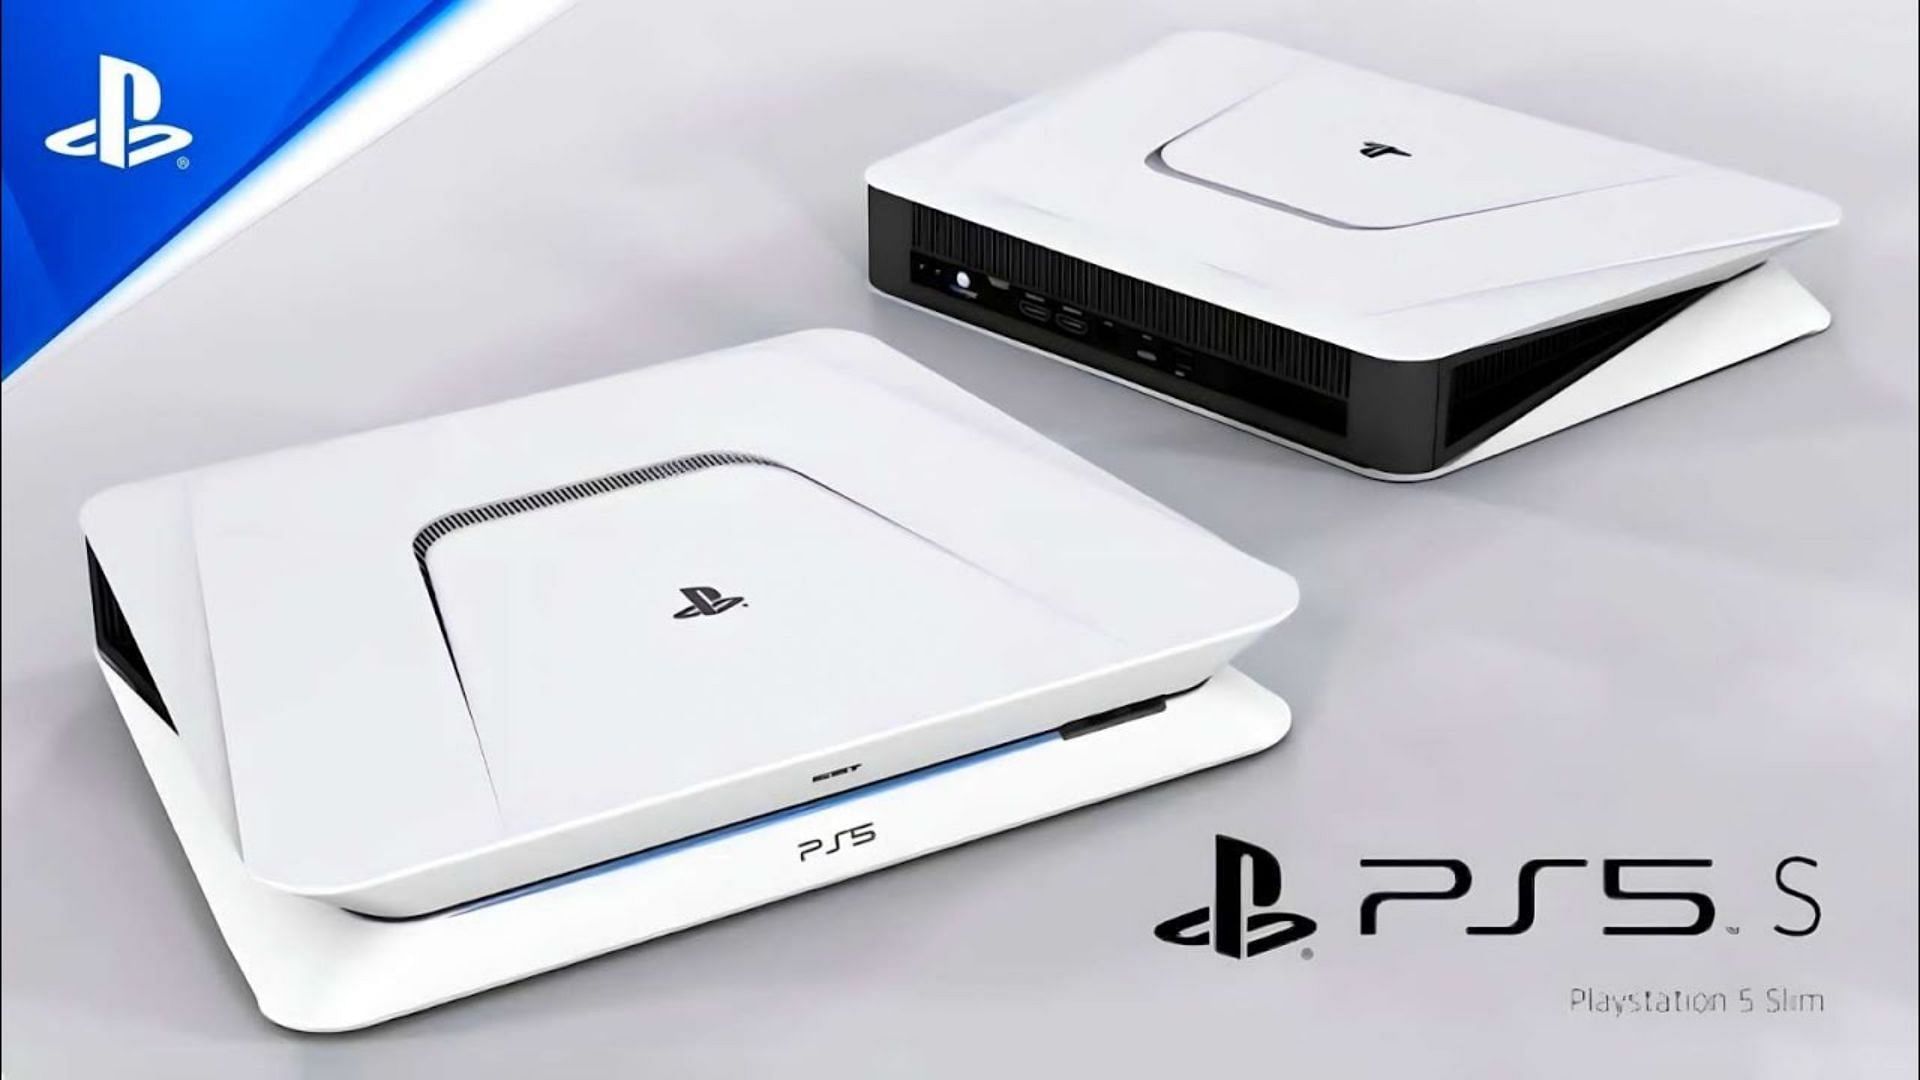 PlayStation 5 Slim rumor claims new PS5 model will sport 5-nm APU